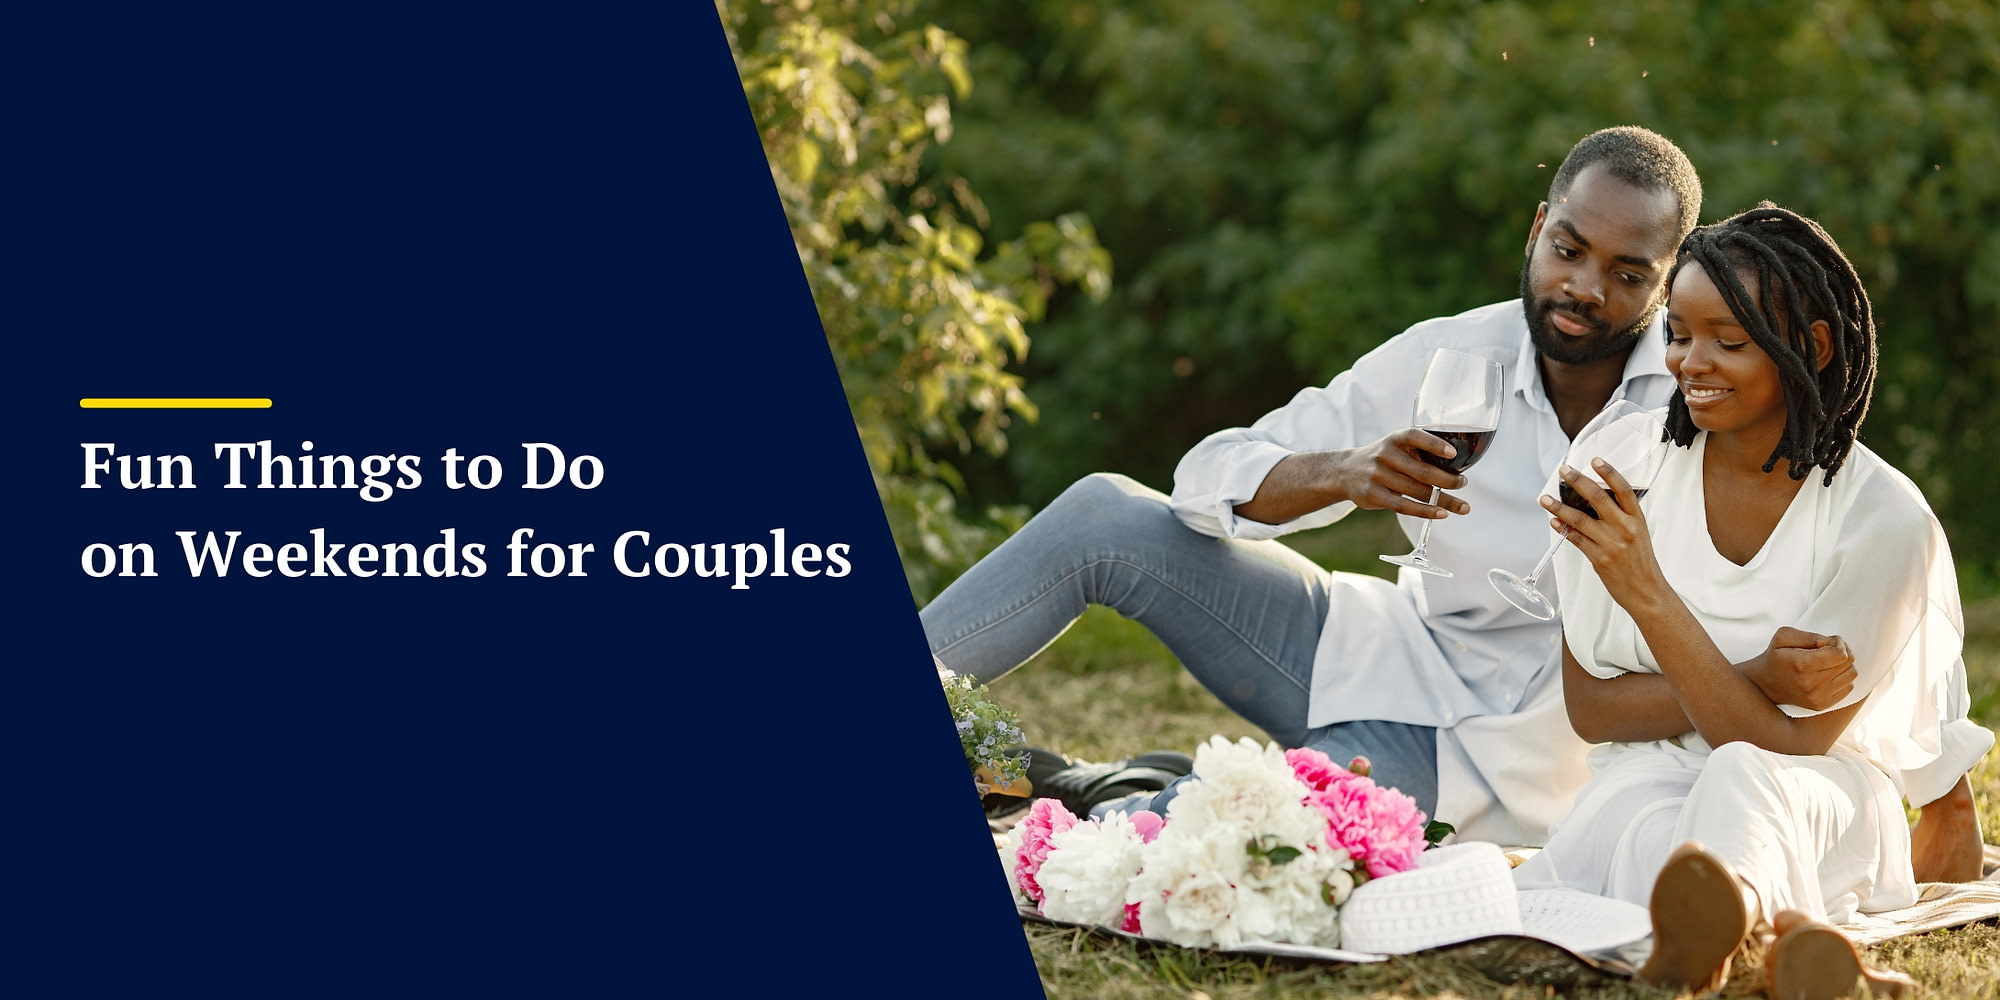 Fun Things to Do on Weekends for Couples